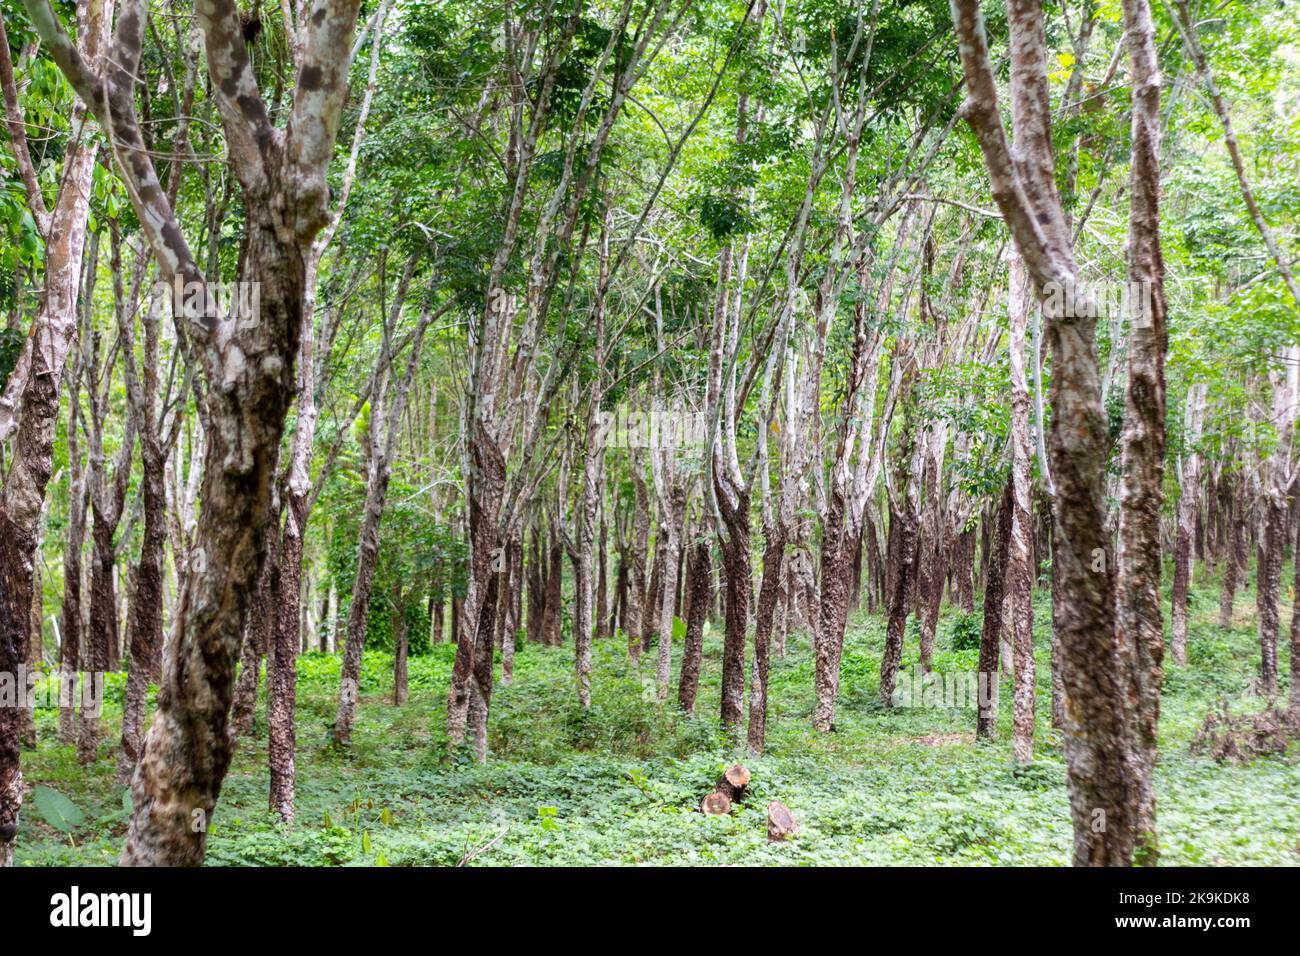 A rubber trees at a plantation in Basilan, Philippines Stock Photo